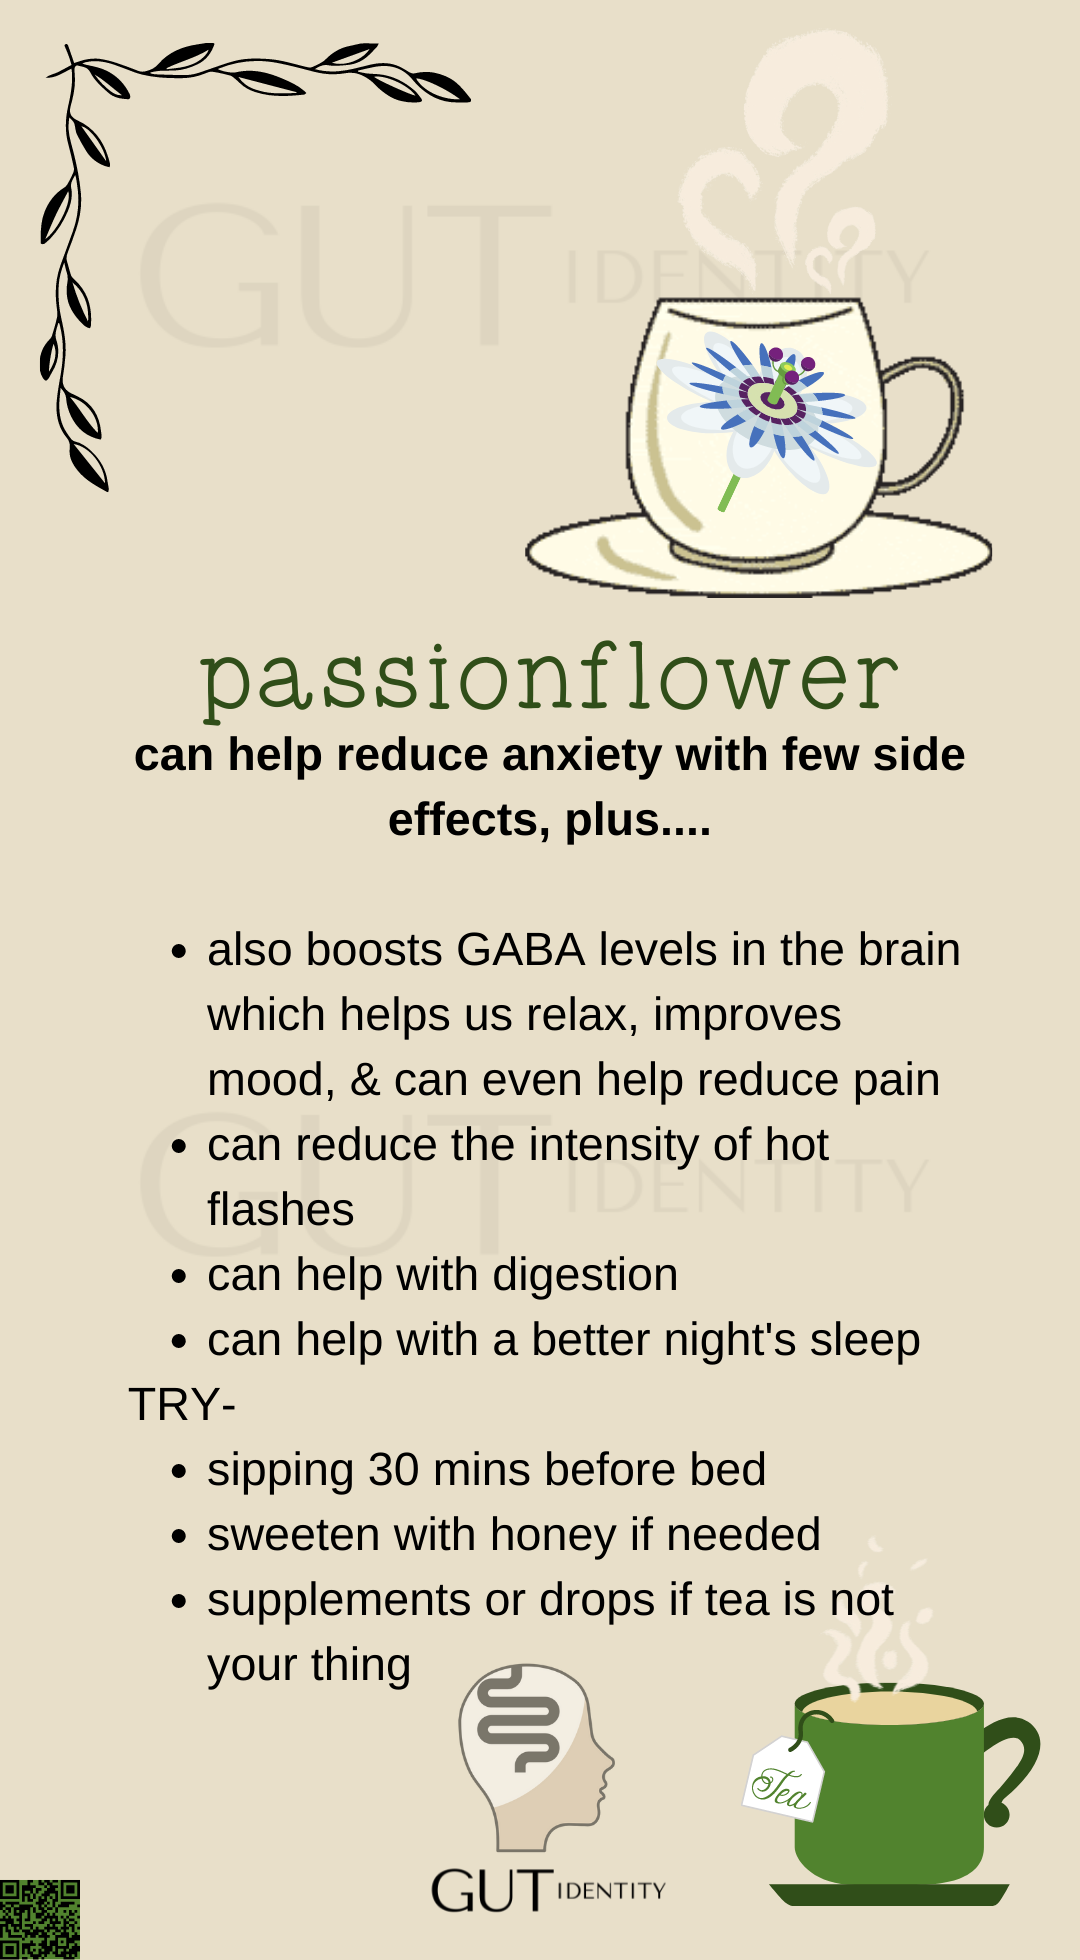 Passionflower tea to reduce anxiety by Gutidentity